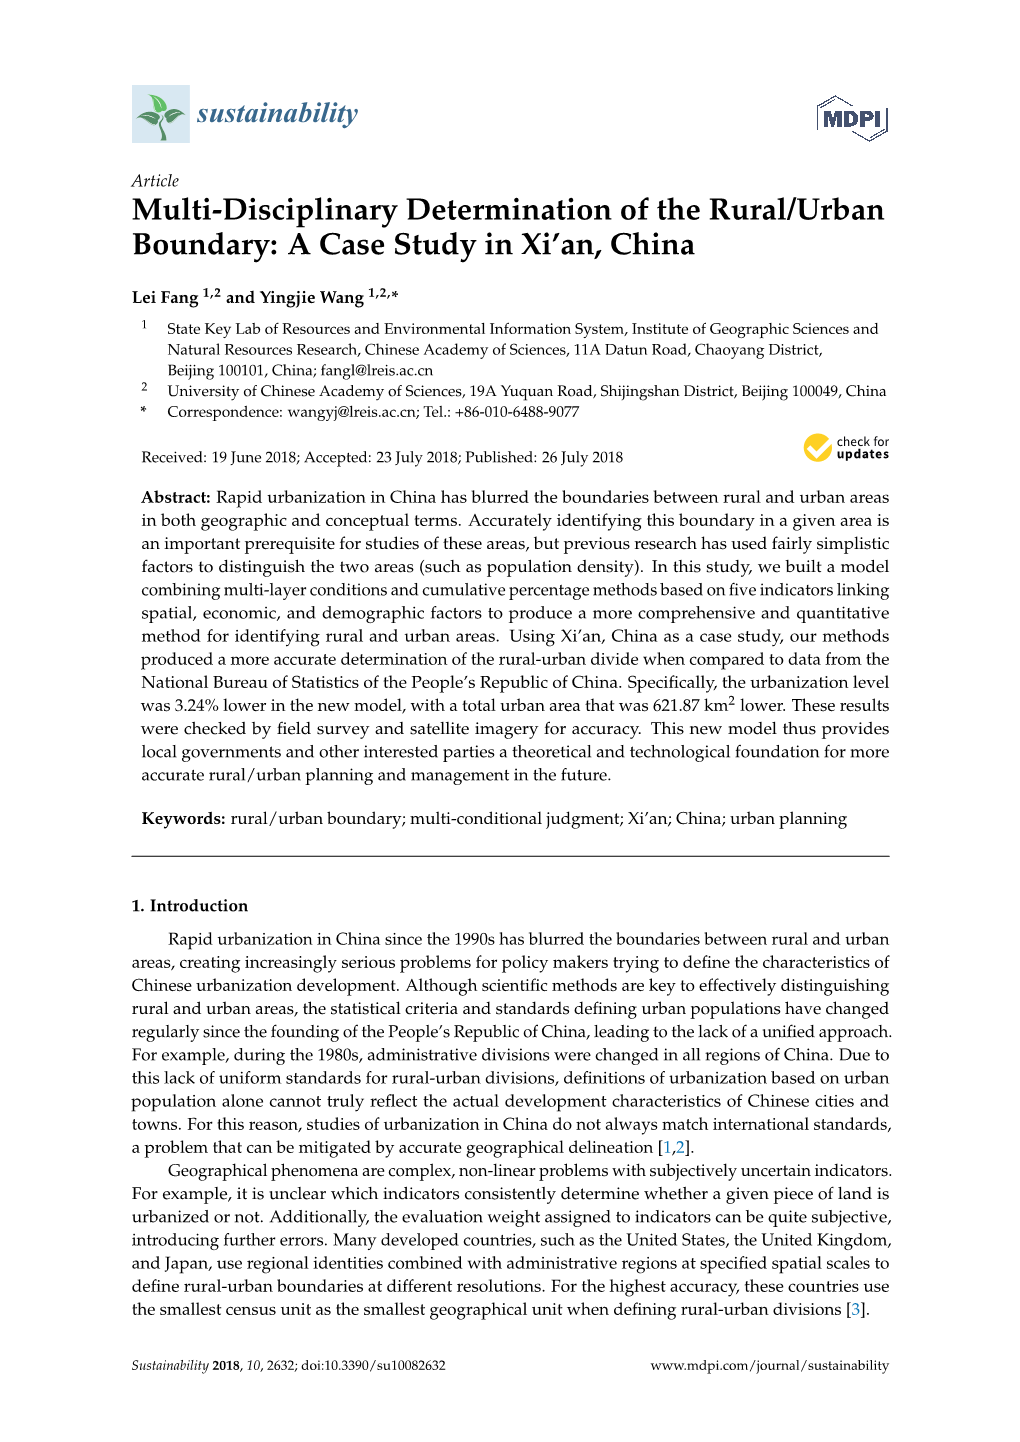 Multi-Disciplinary Determination of the Rural/Urban Boundary: a Case Study in Xi’An, China